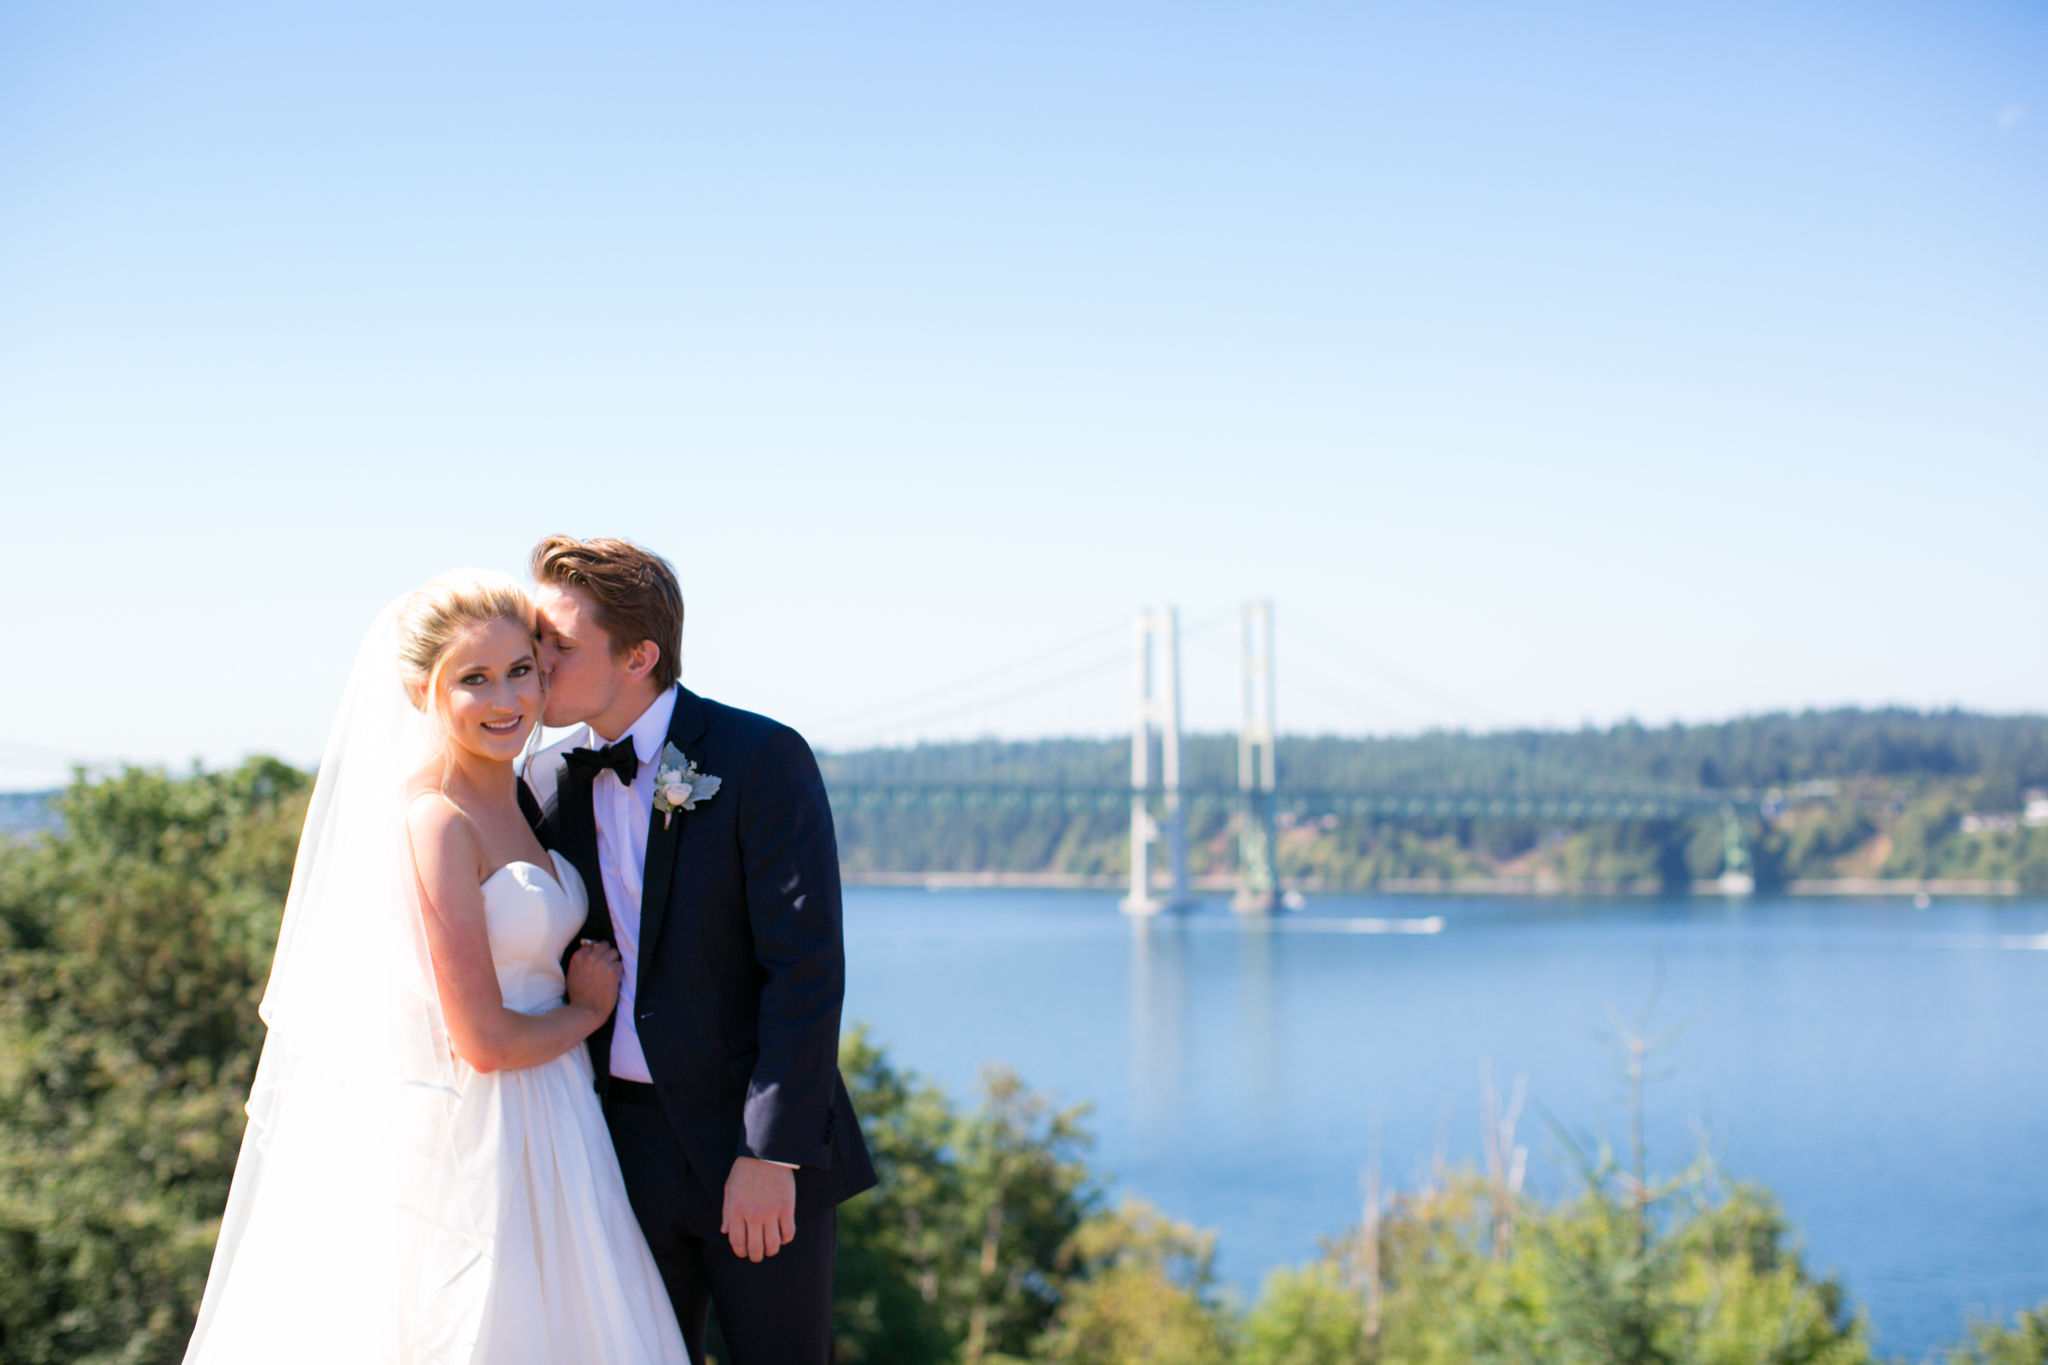 Tacoma Wedding Featured in South Sound Wedding &amp; Event Magazine